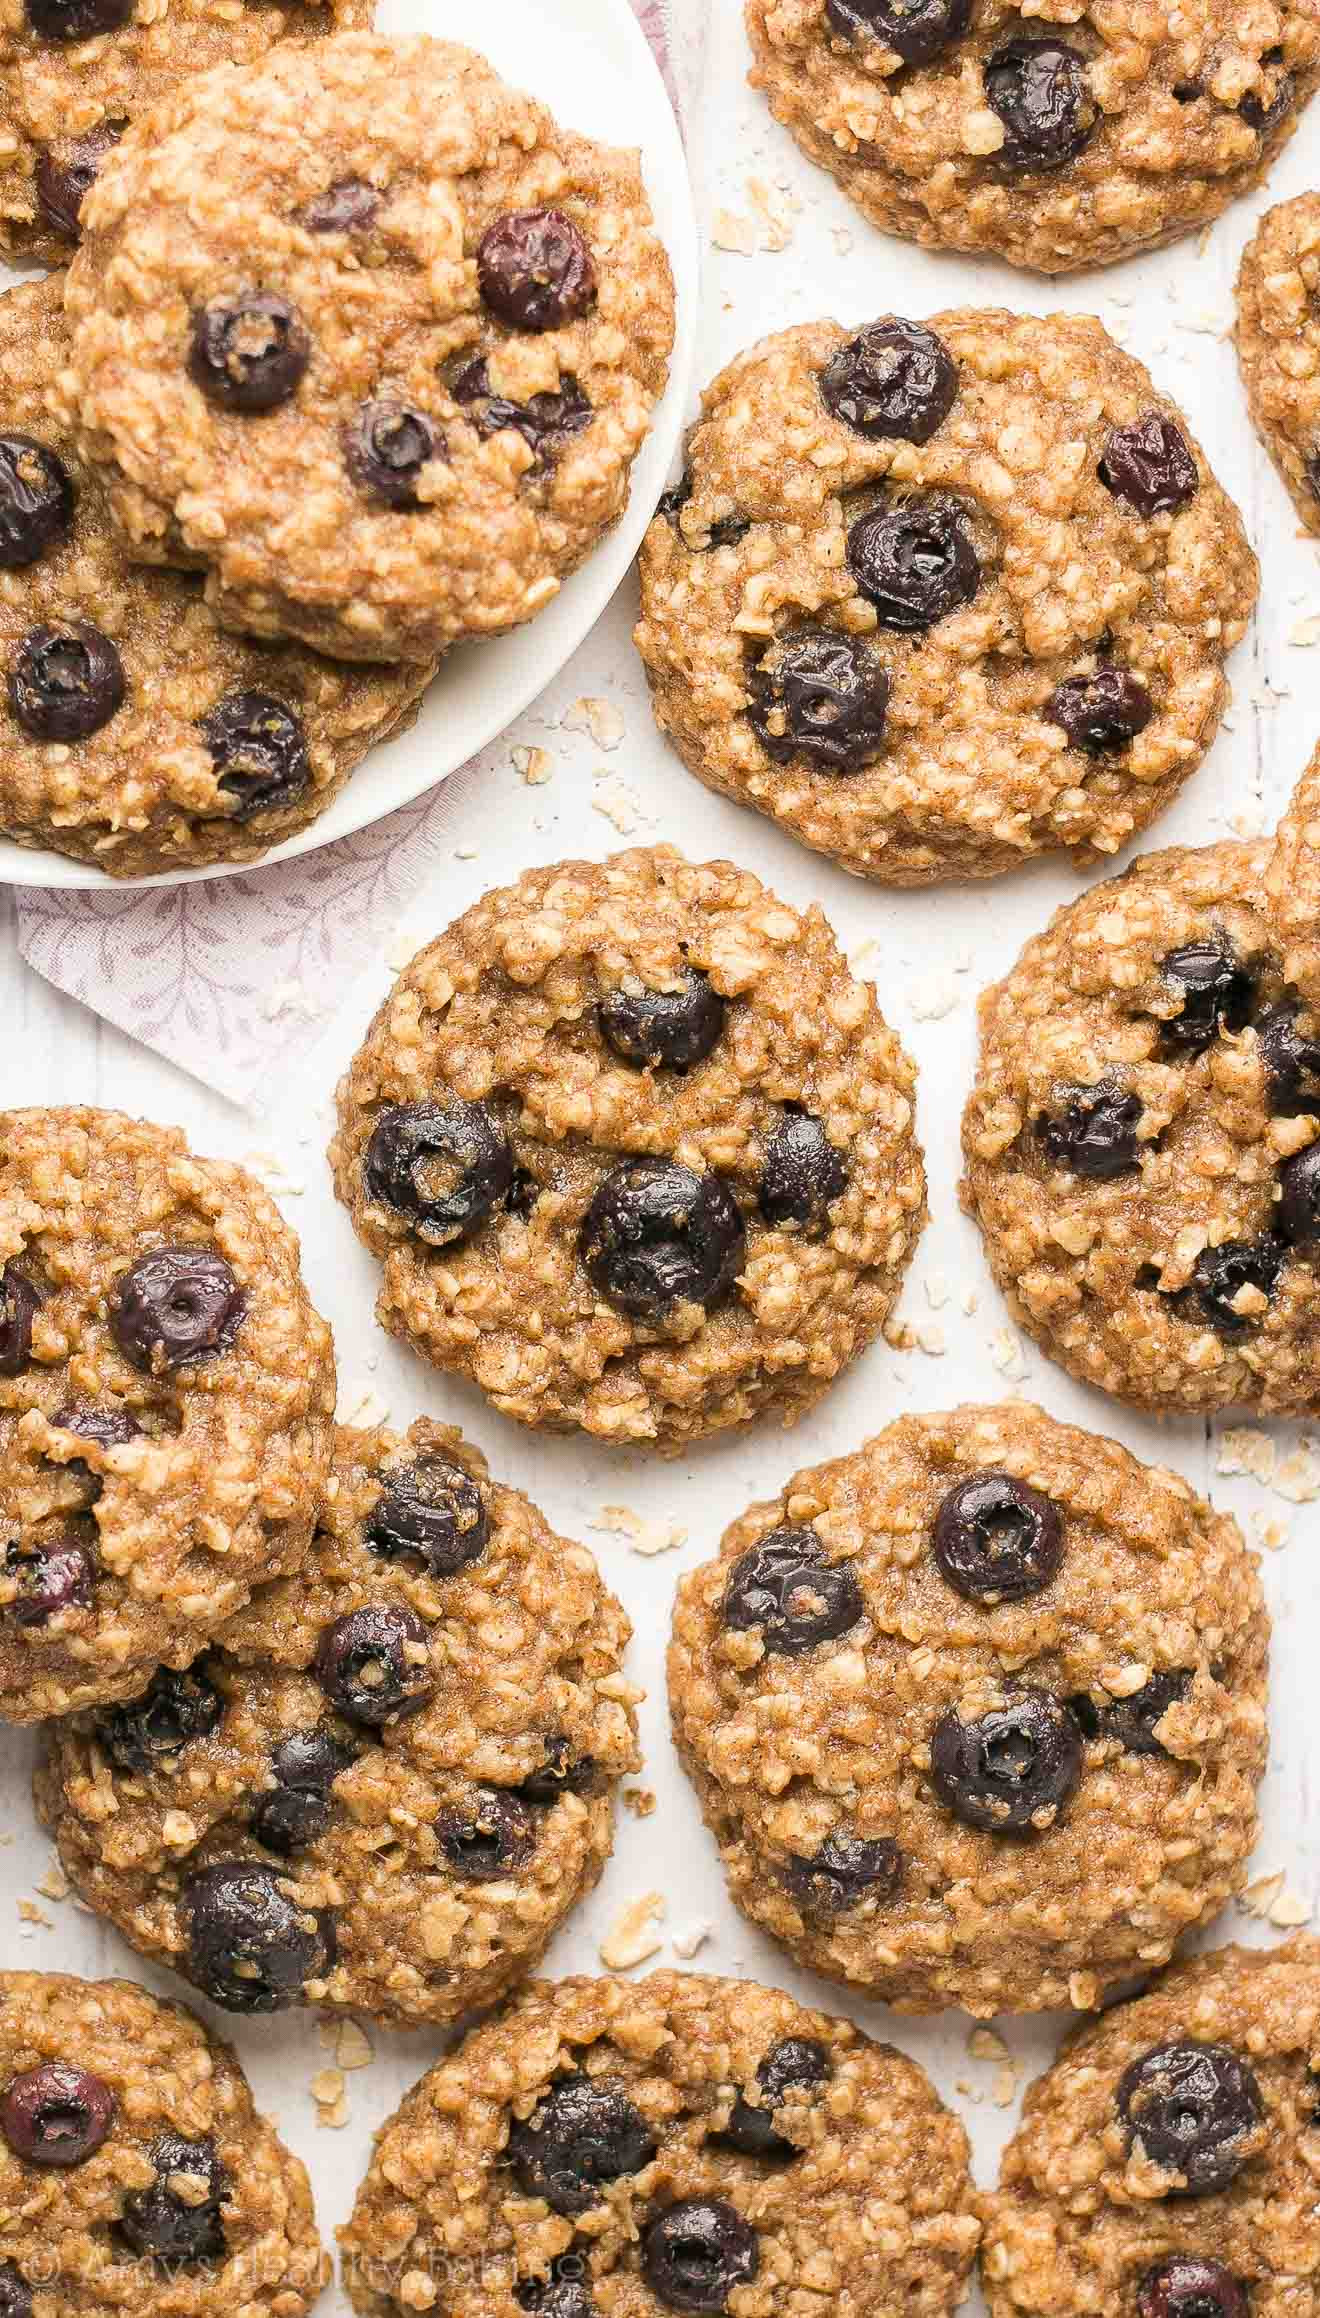 Healthy Blueberry Oatmeal Cookies
 healthy banana blueberry oatmeal cookies